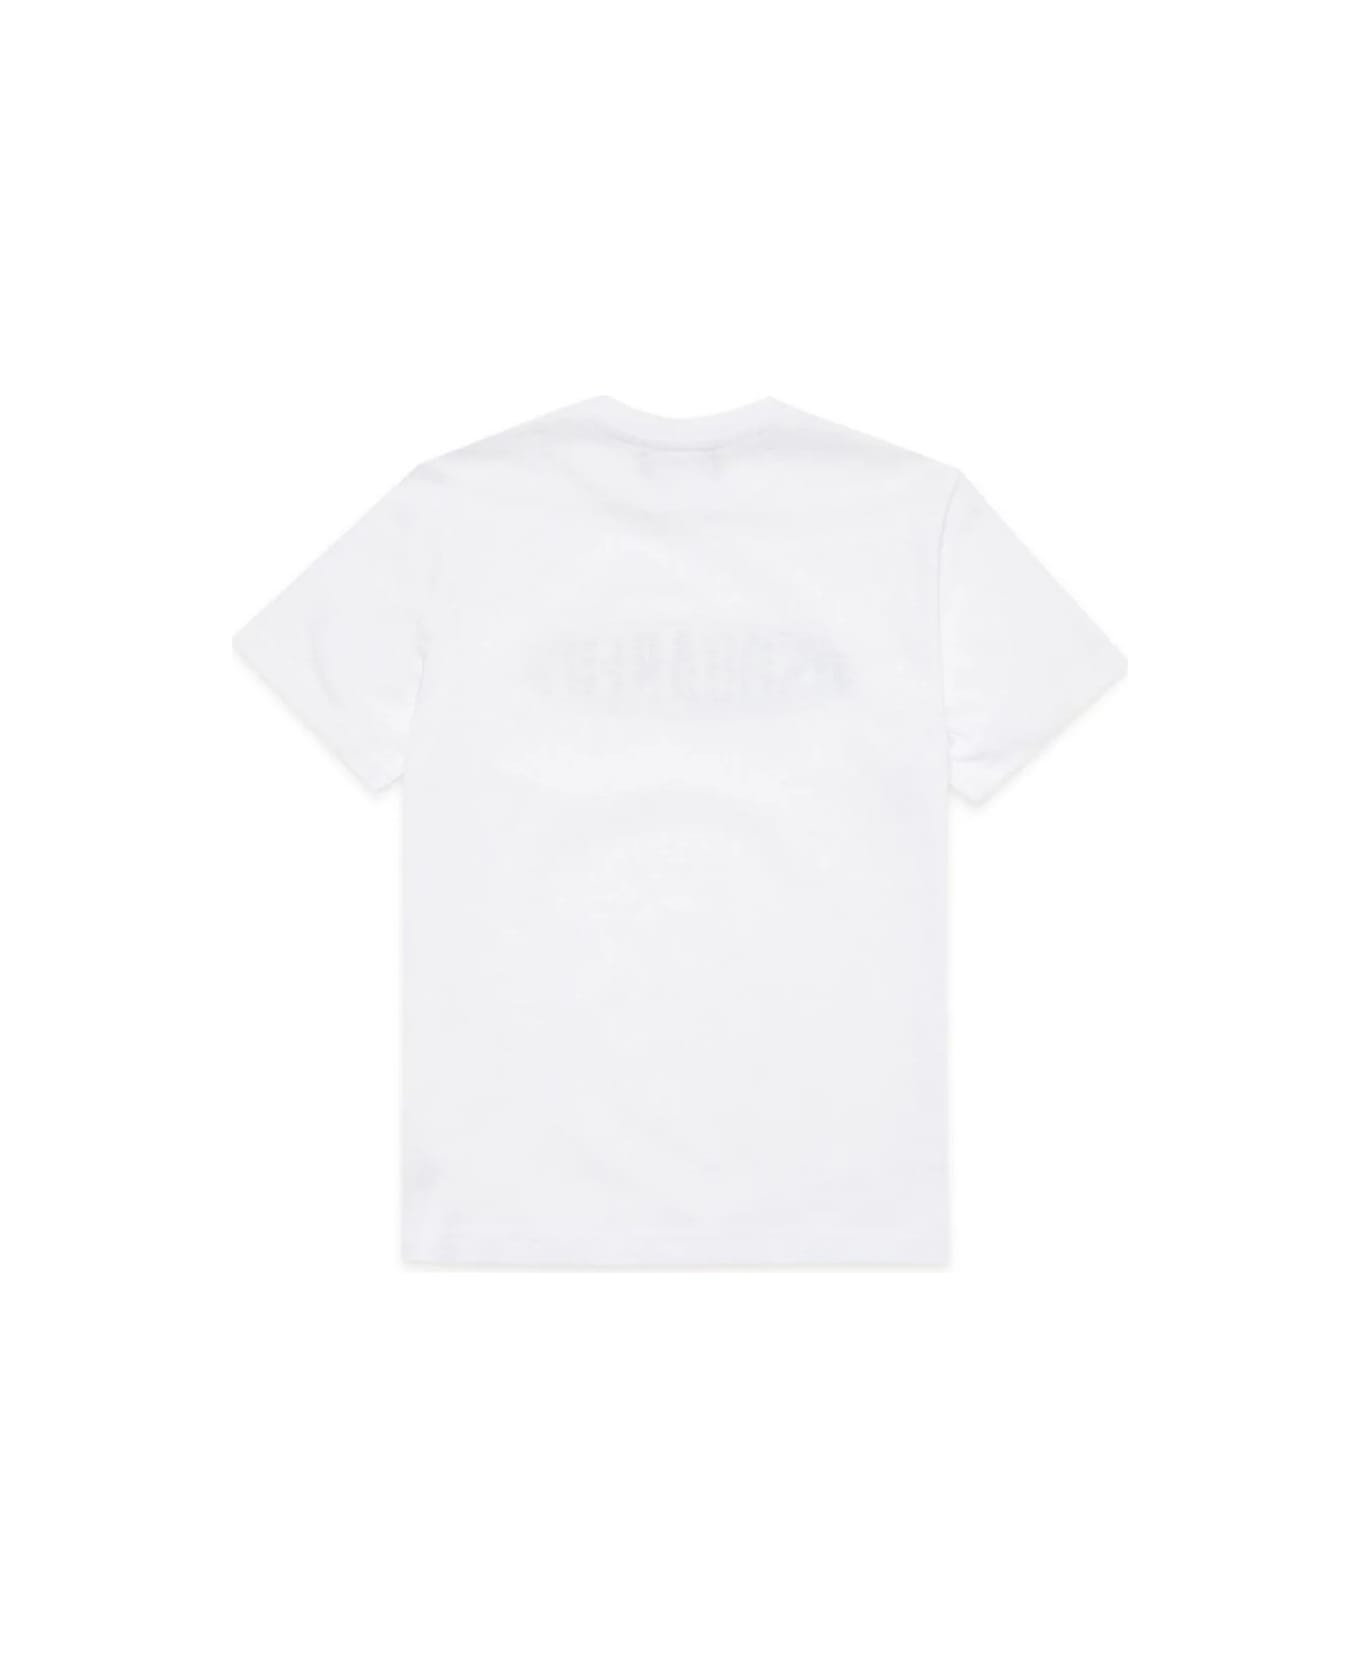 Dsquared2 White T-shirt With Dsquared2 Print - White